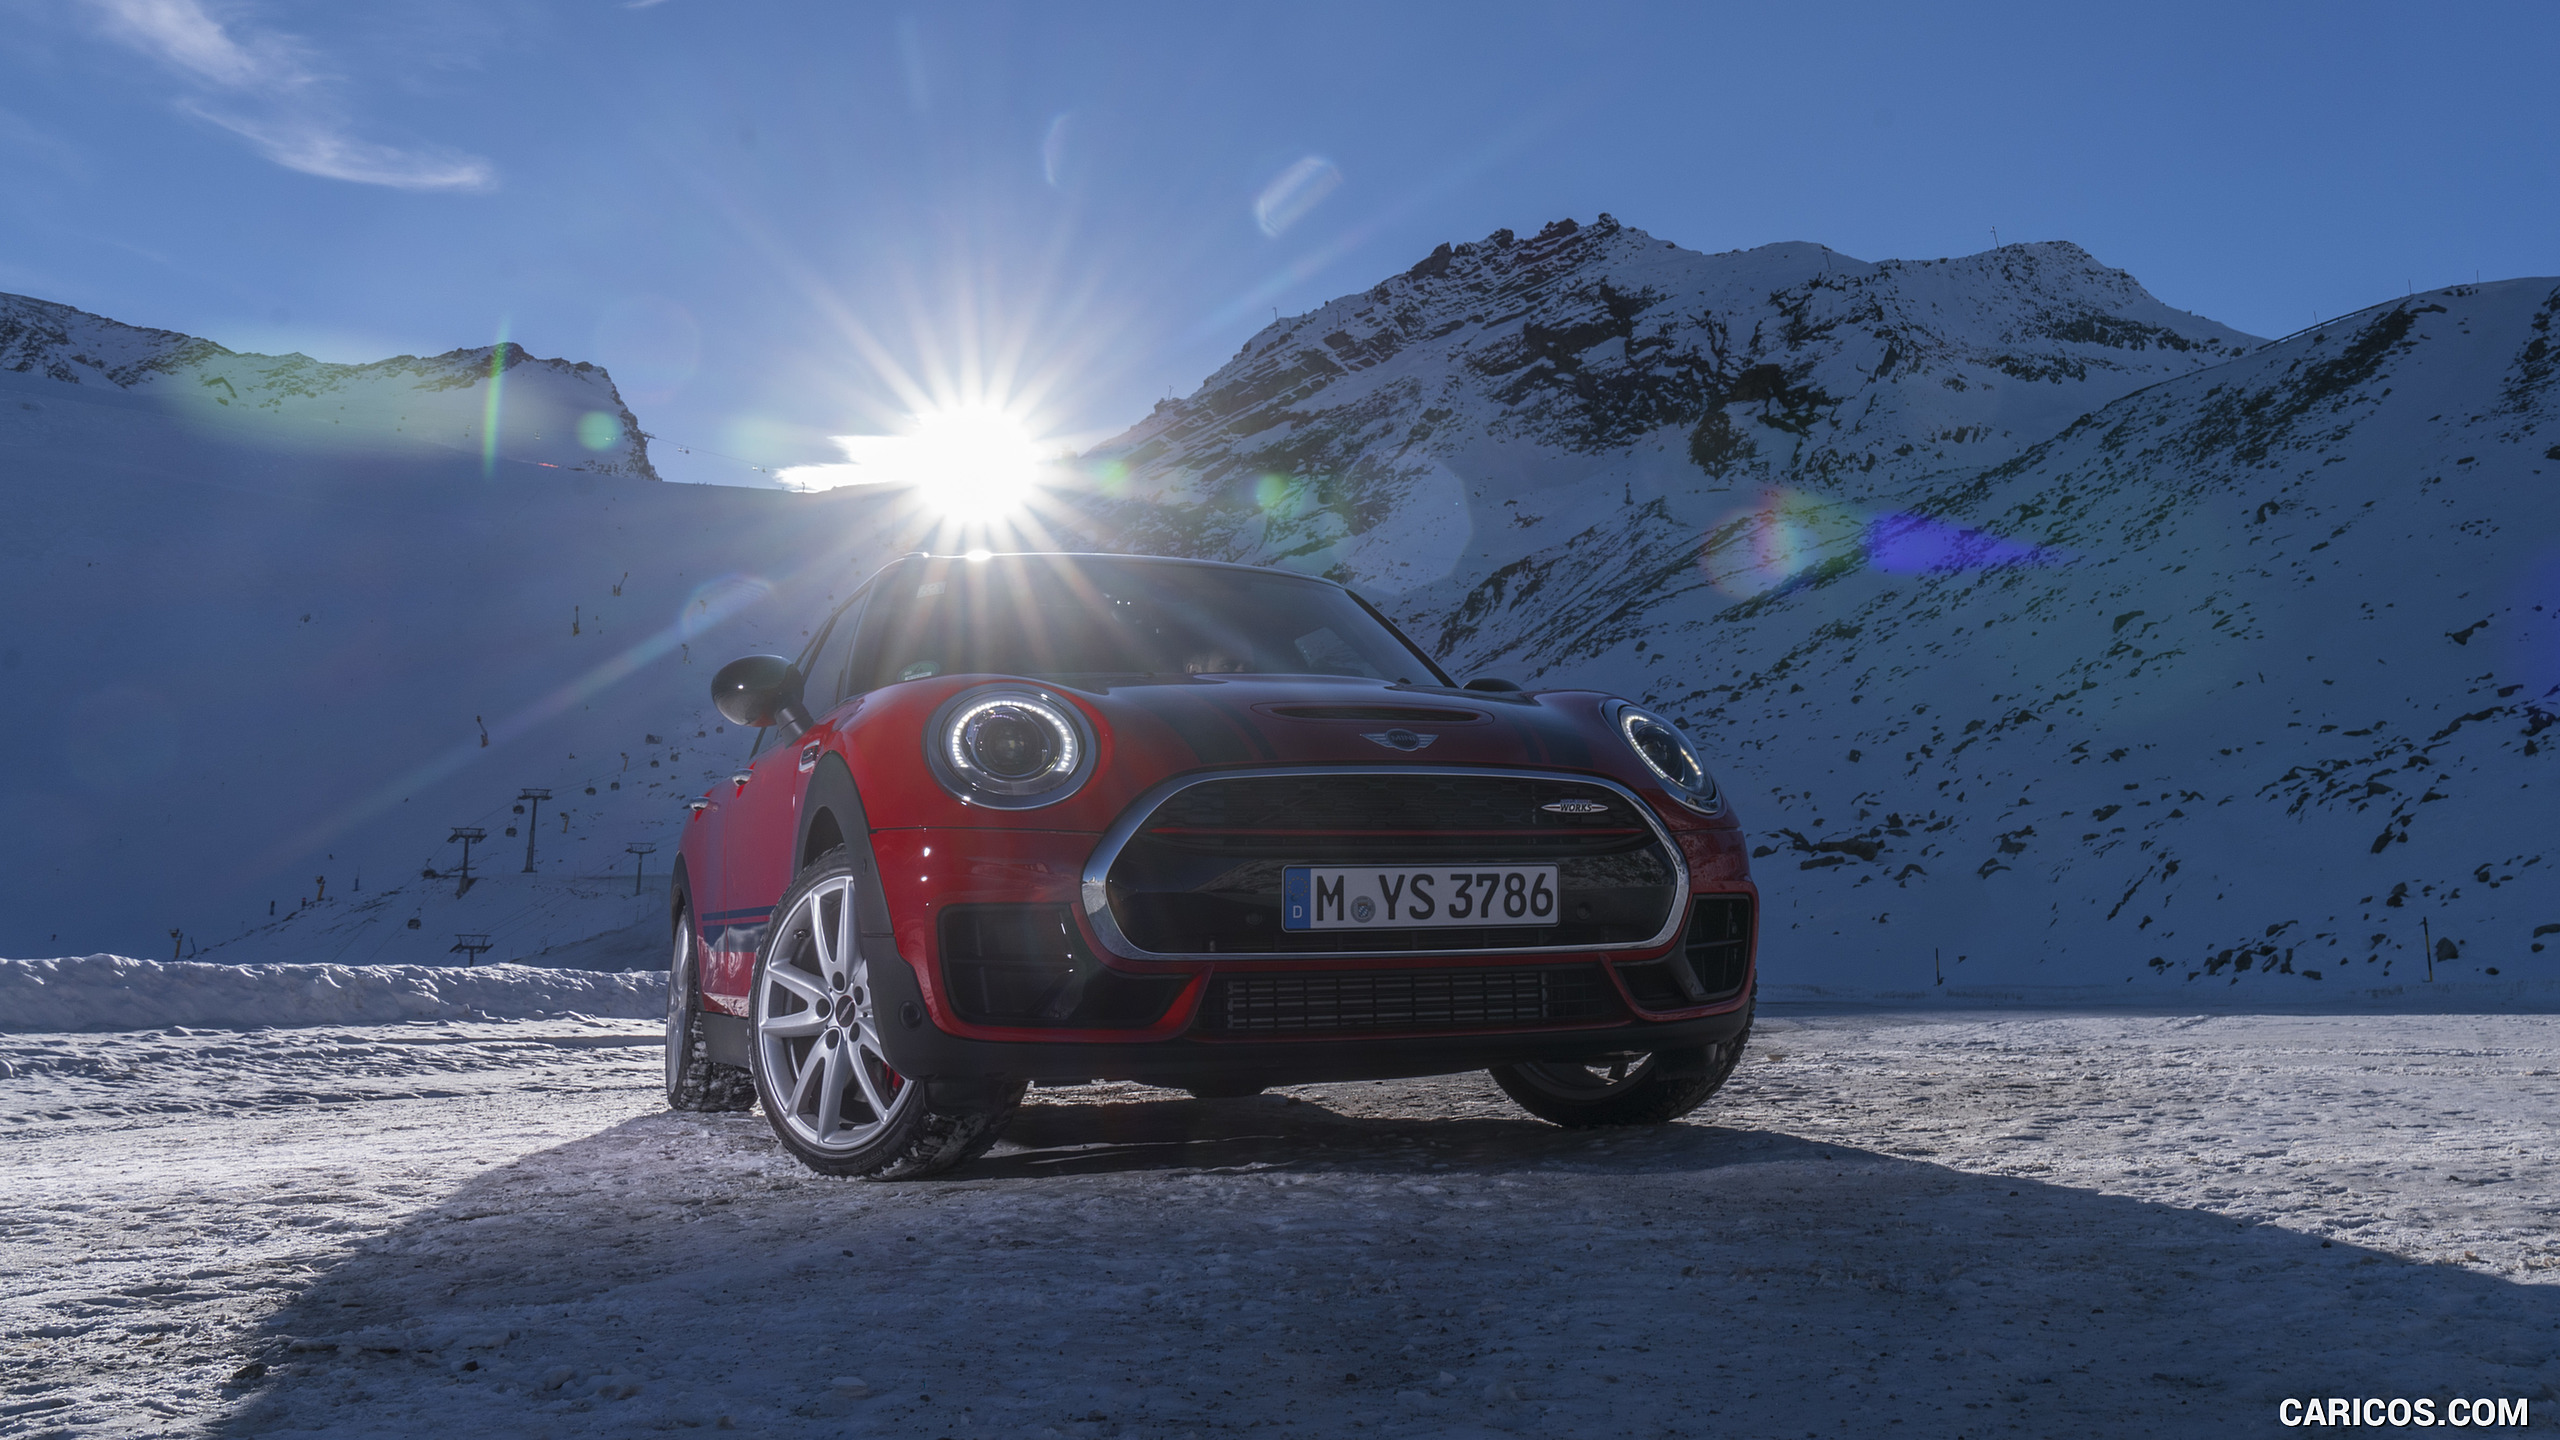 2017 MINI Clubman John Cooper Works in Snow - Front, #43 of 72